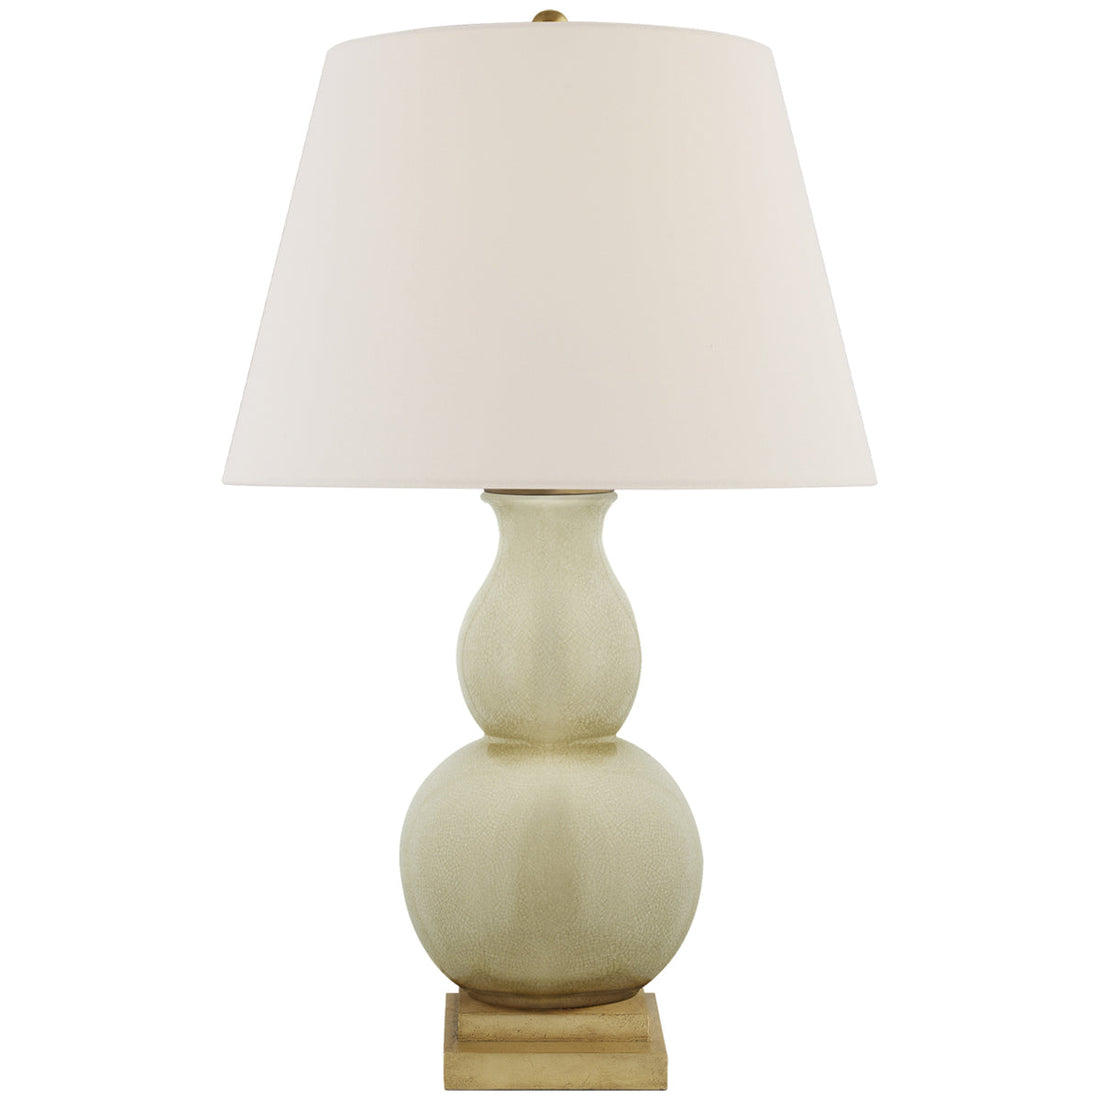 Visual Comfort Gourd Form Small Table Lamp